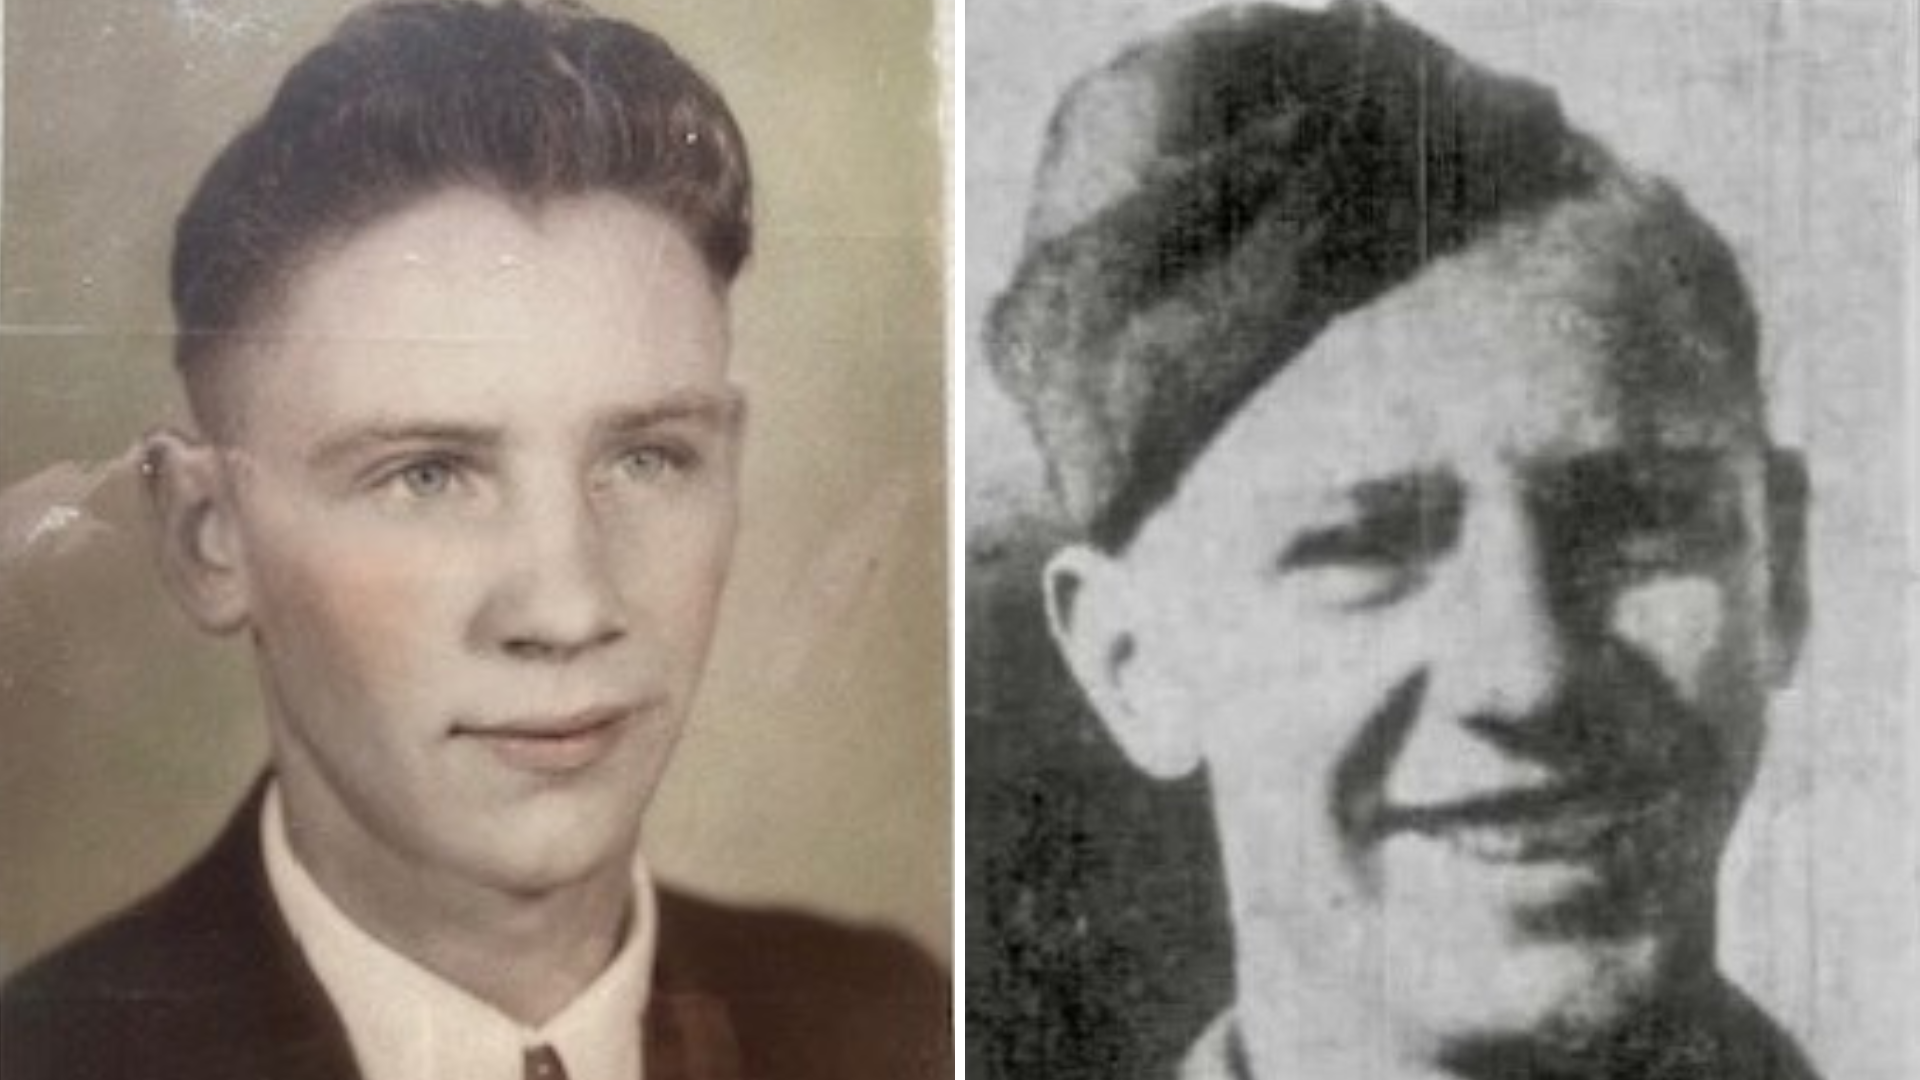 Images of U.S. Army Air Force Pvt. Doyle Wayne Sexton, of Duchesne, Utah, who died in a POW camp du...